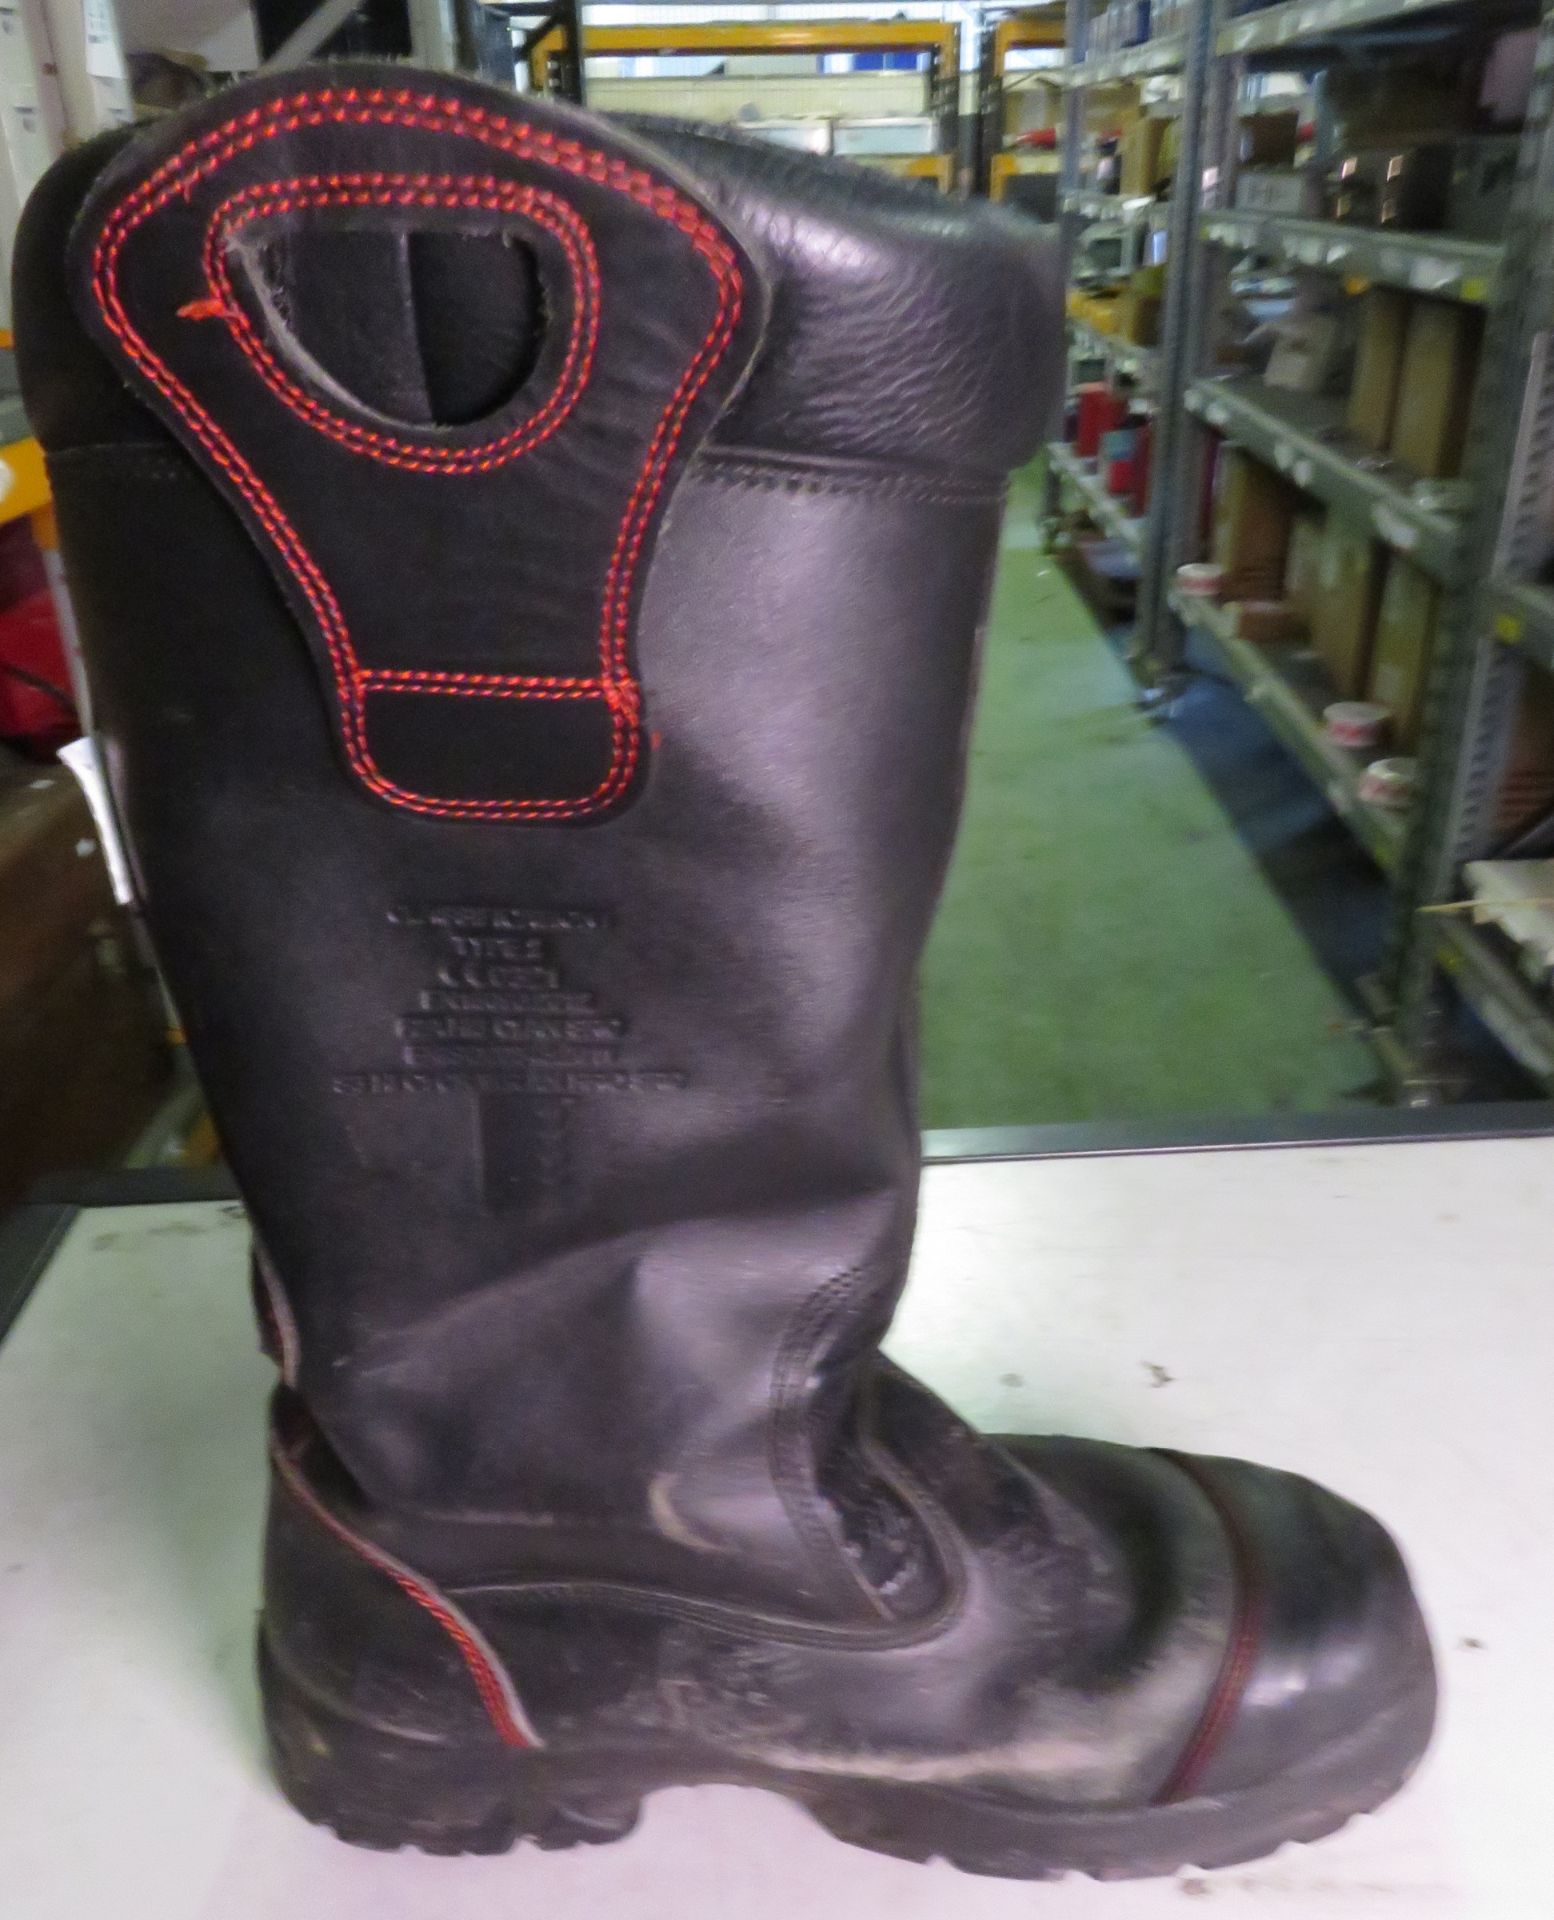 Crosstech YDS - used fire fighter boots - size 10 - Image 2 of 2